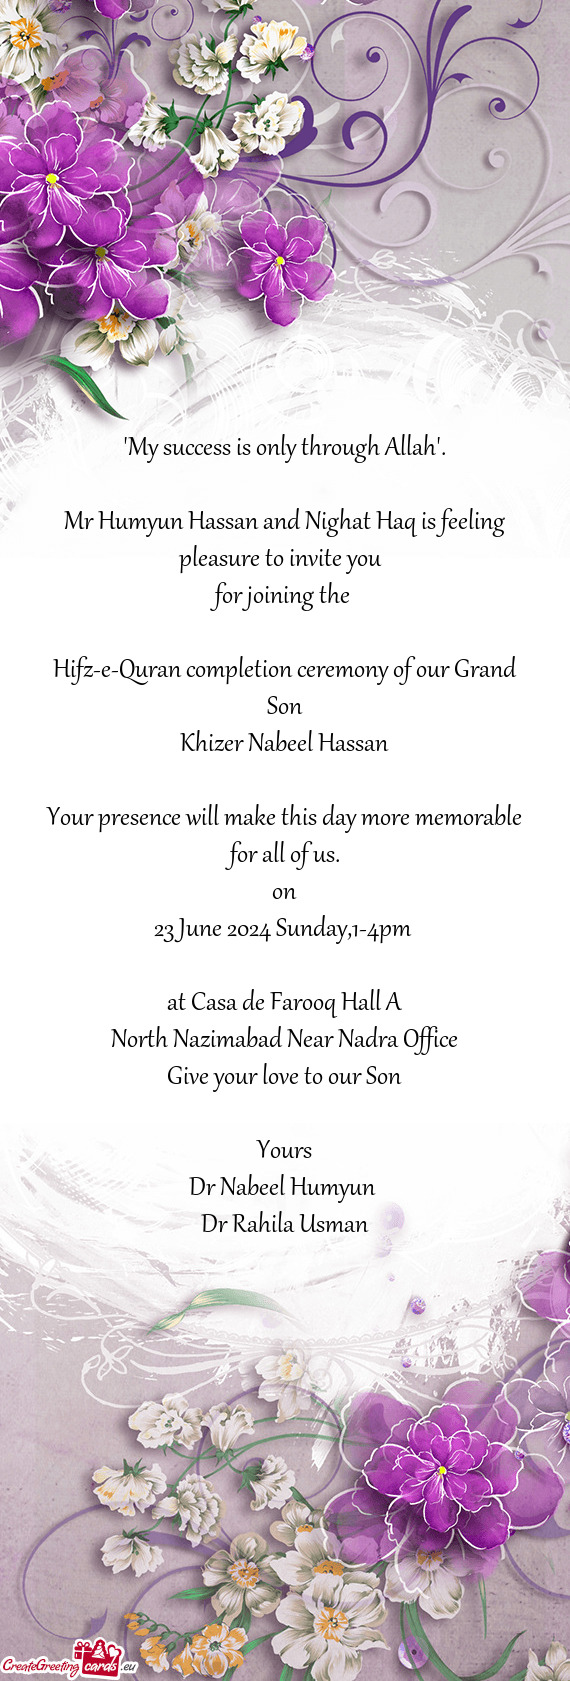 Mr Humyun Hassan and Nighat Haq is feeling pleasure to invite you